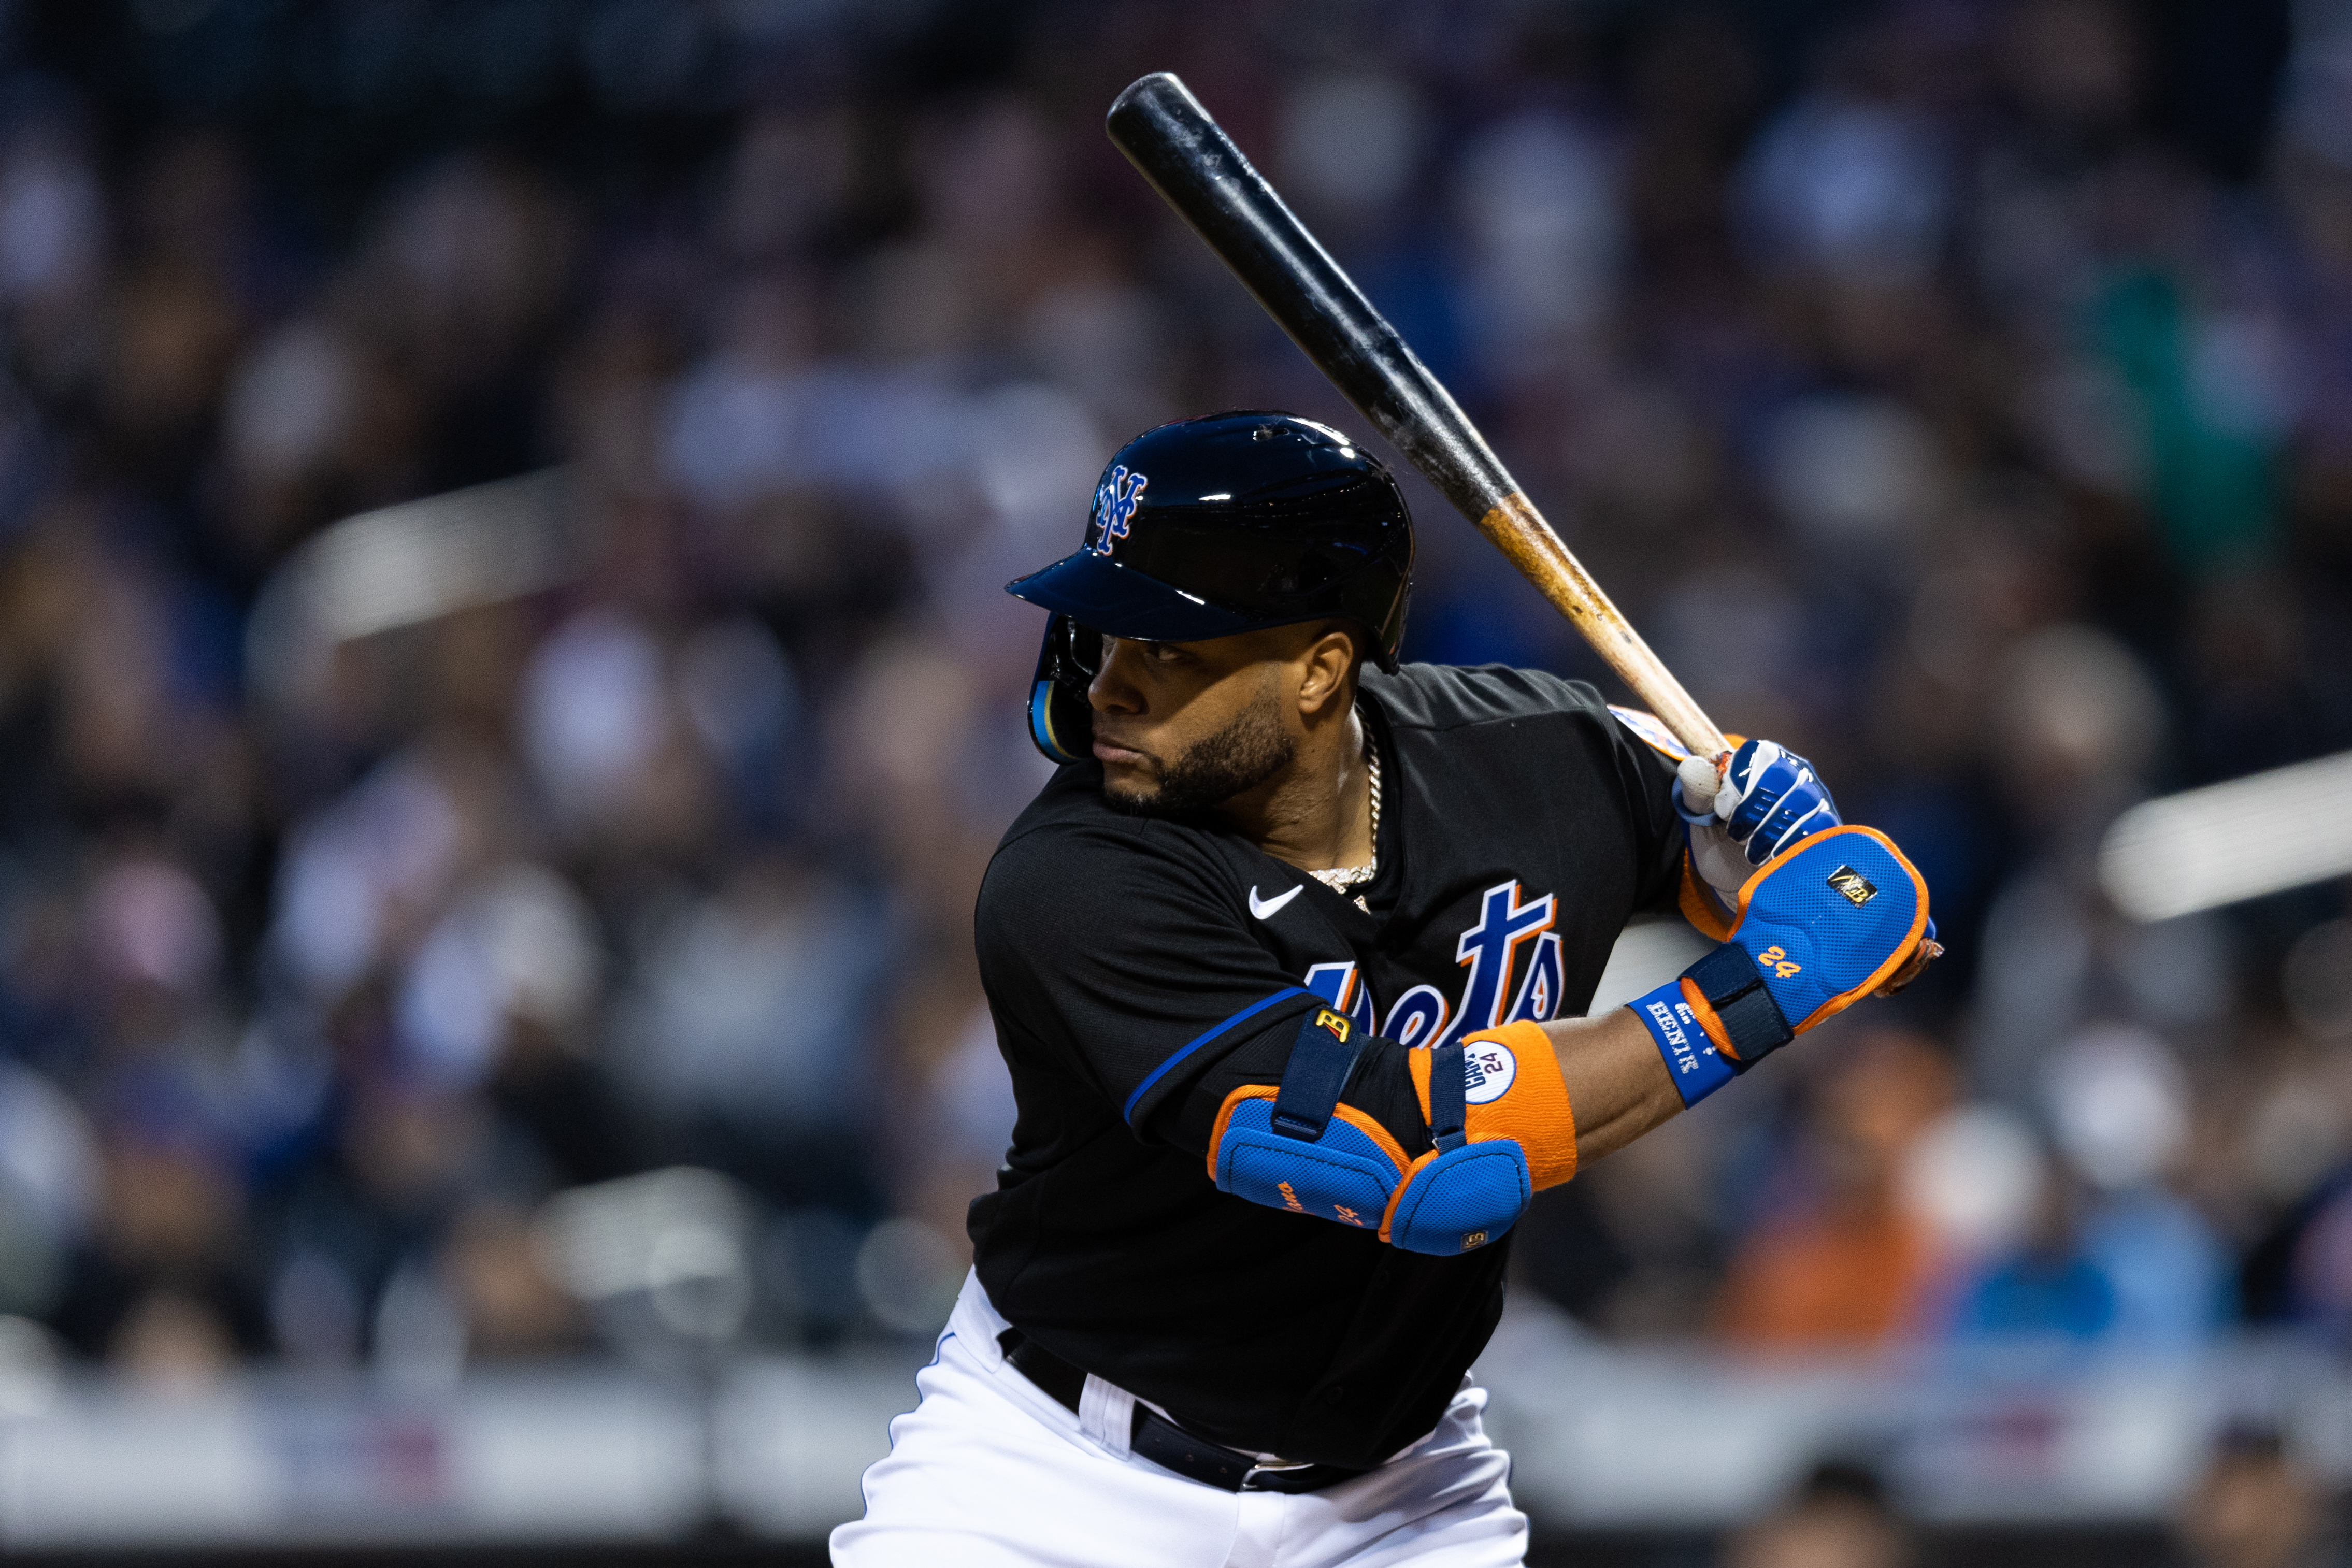 Robinson Cano Designated for Assignment by Mets; Hit for .195 in 12 Games